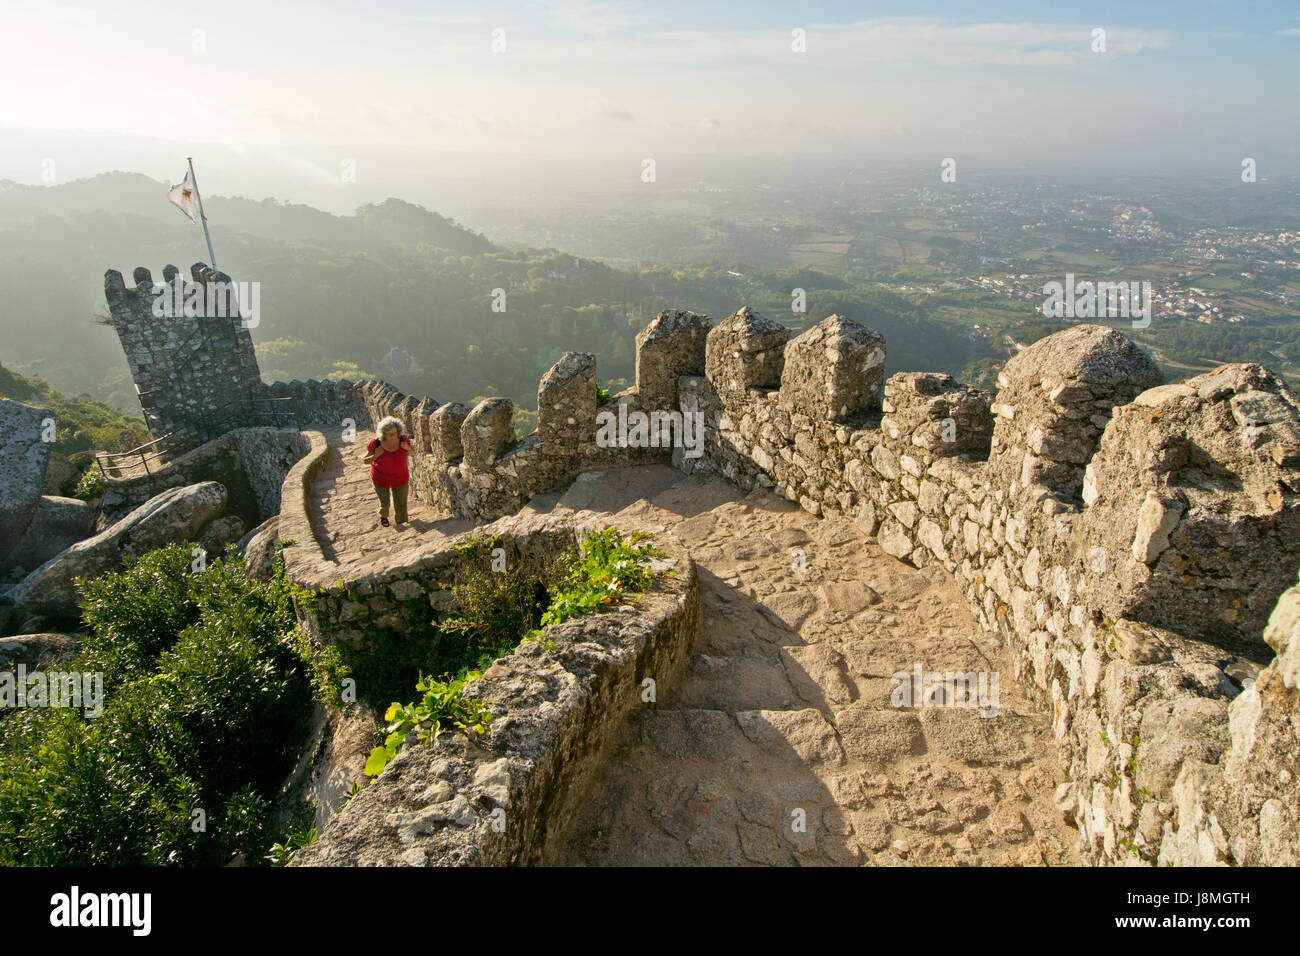 Castelo dos Mouros (Castle of the Moors), dating back to the 10th century, in the Sintra mountain range forest, a Unesco World Heritage site.Portugal Stock Photo